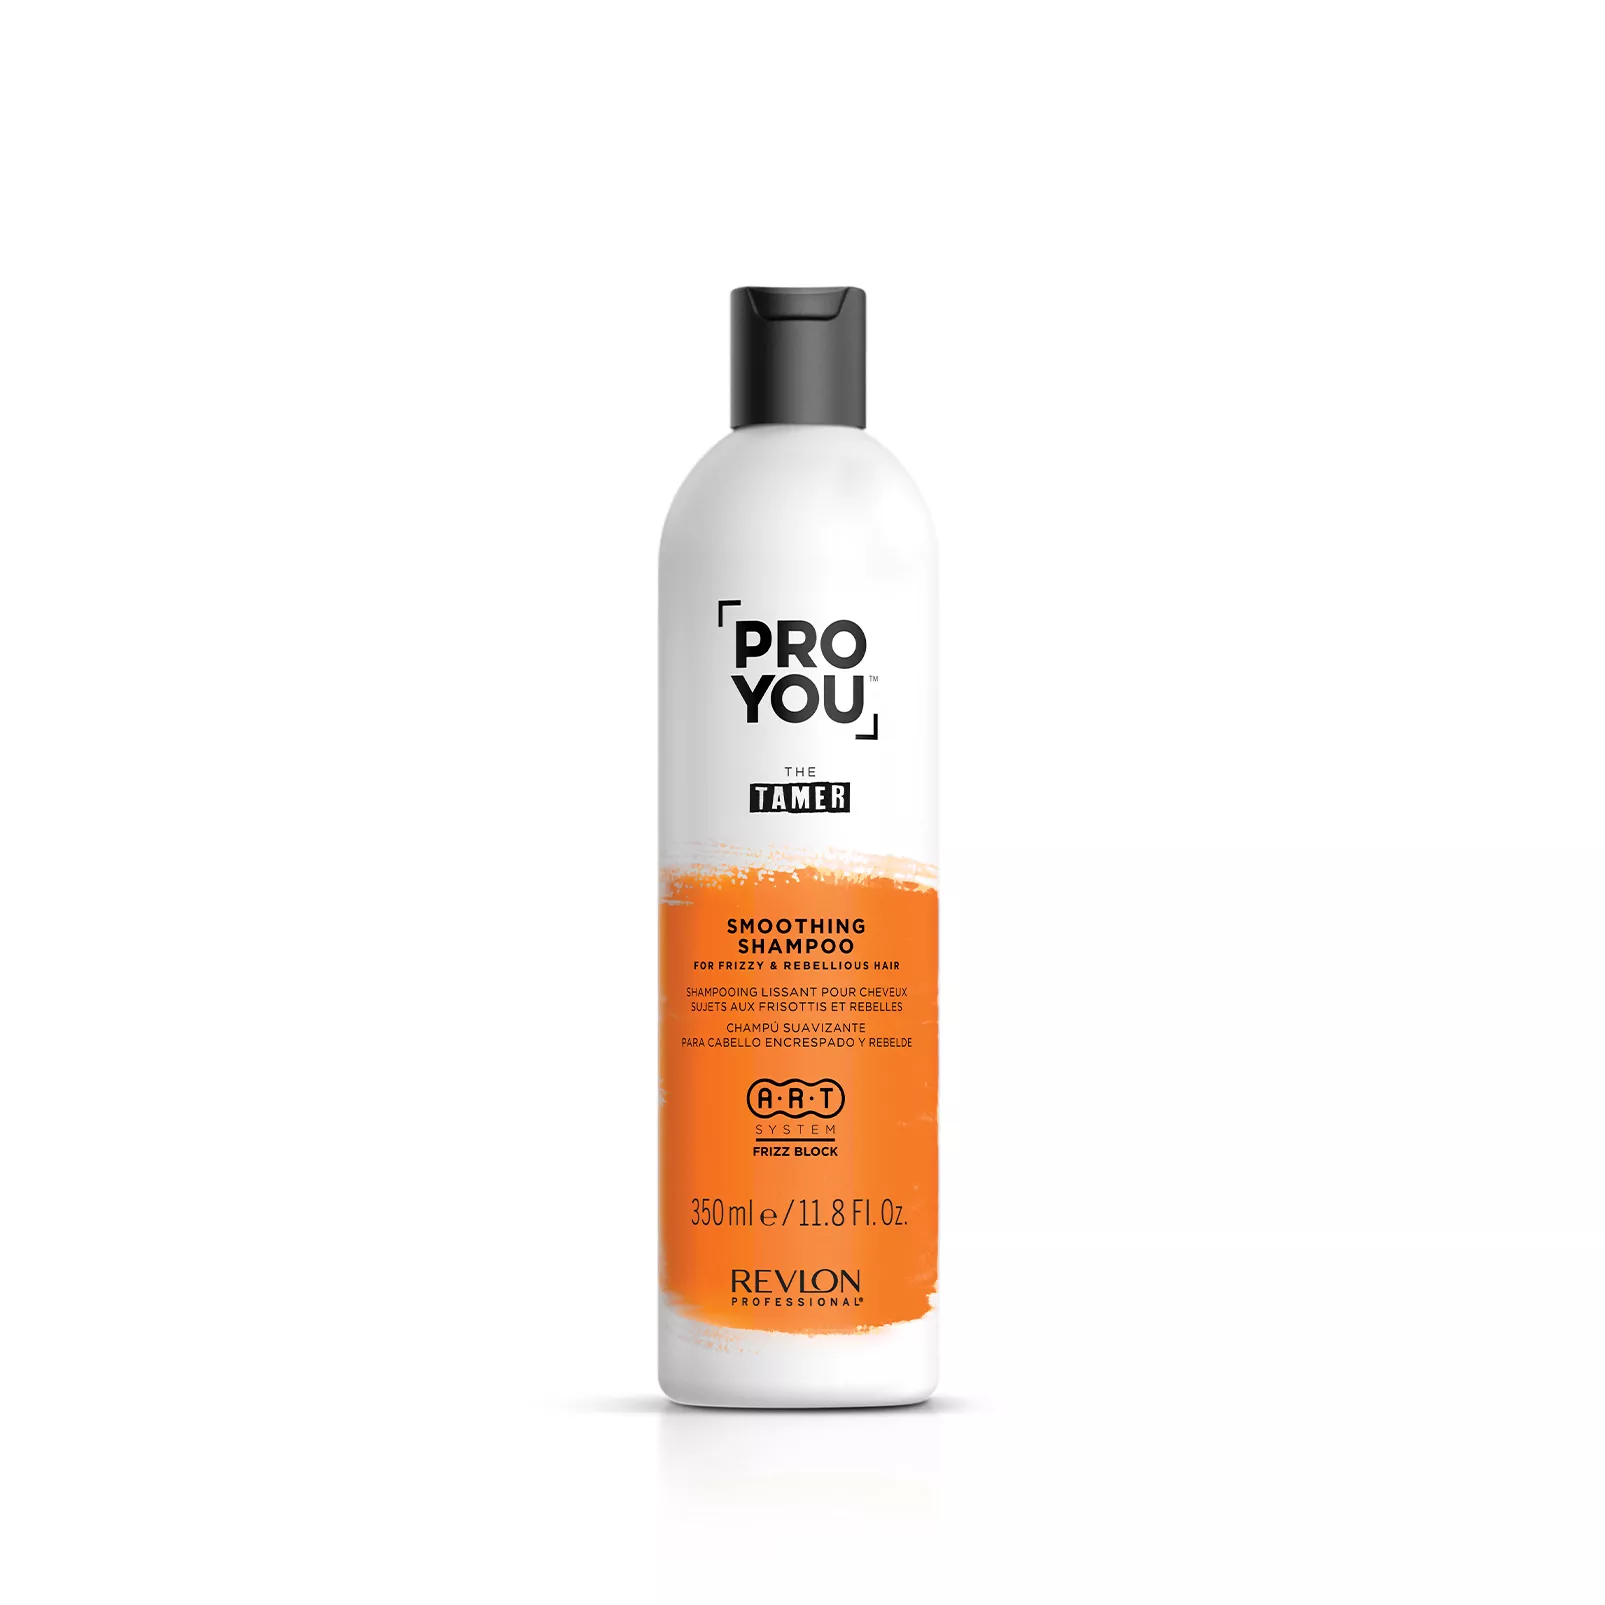 Pro You Care The Tamer Smoothing Shampoo